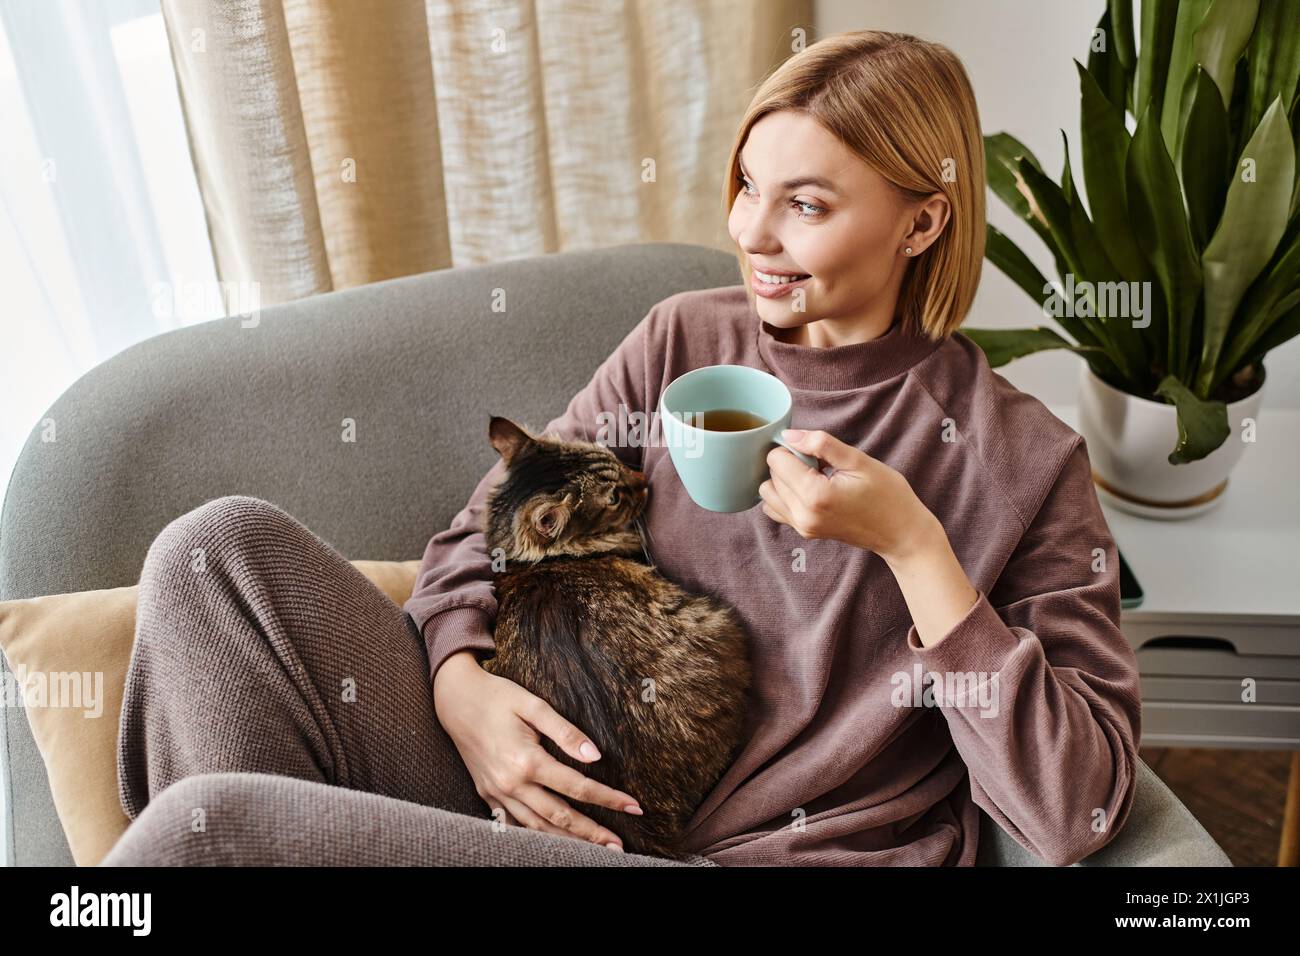 A woman with short hair sitting on a couch, cradling a cup of coffee while petting a cat on her lap. Stock Photo